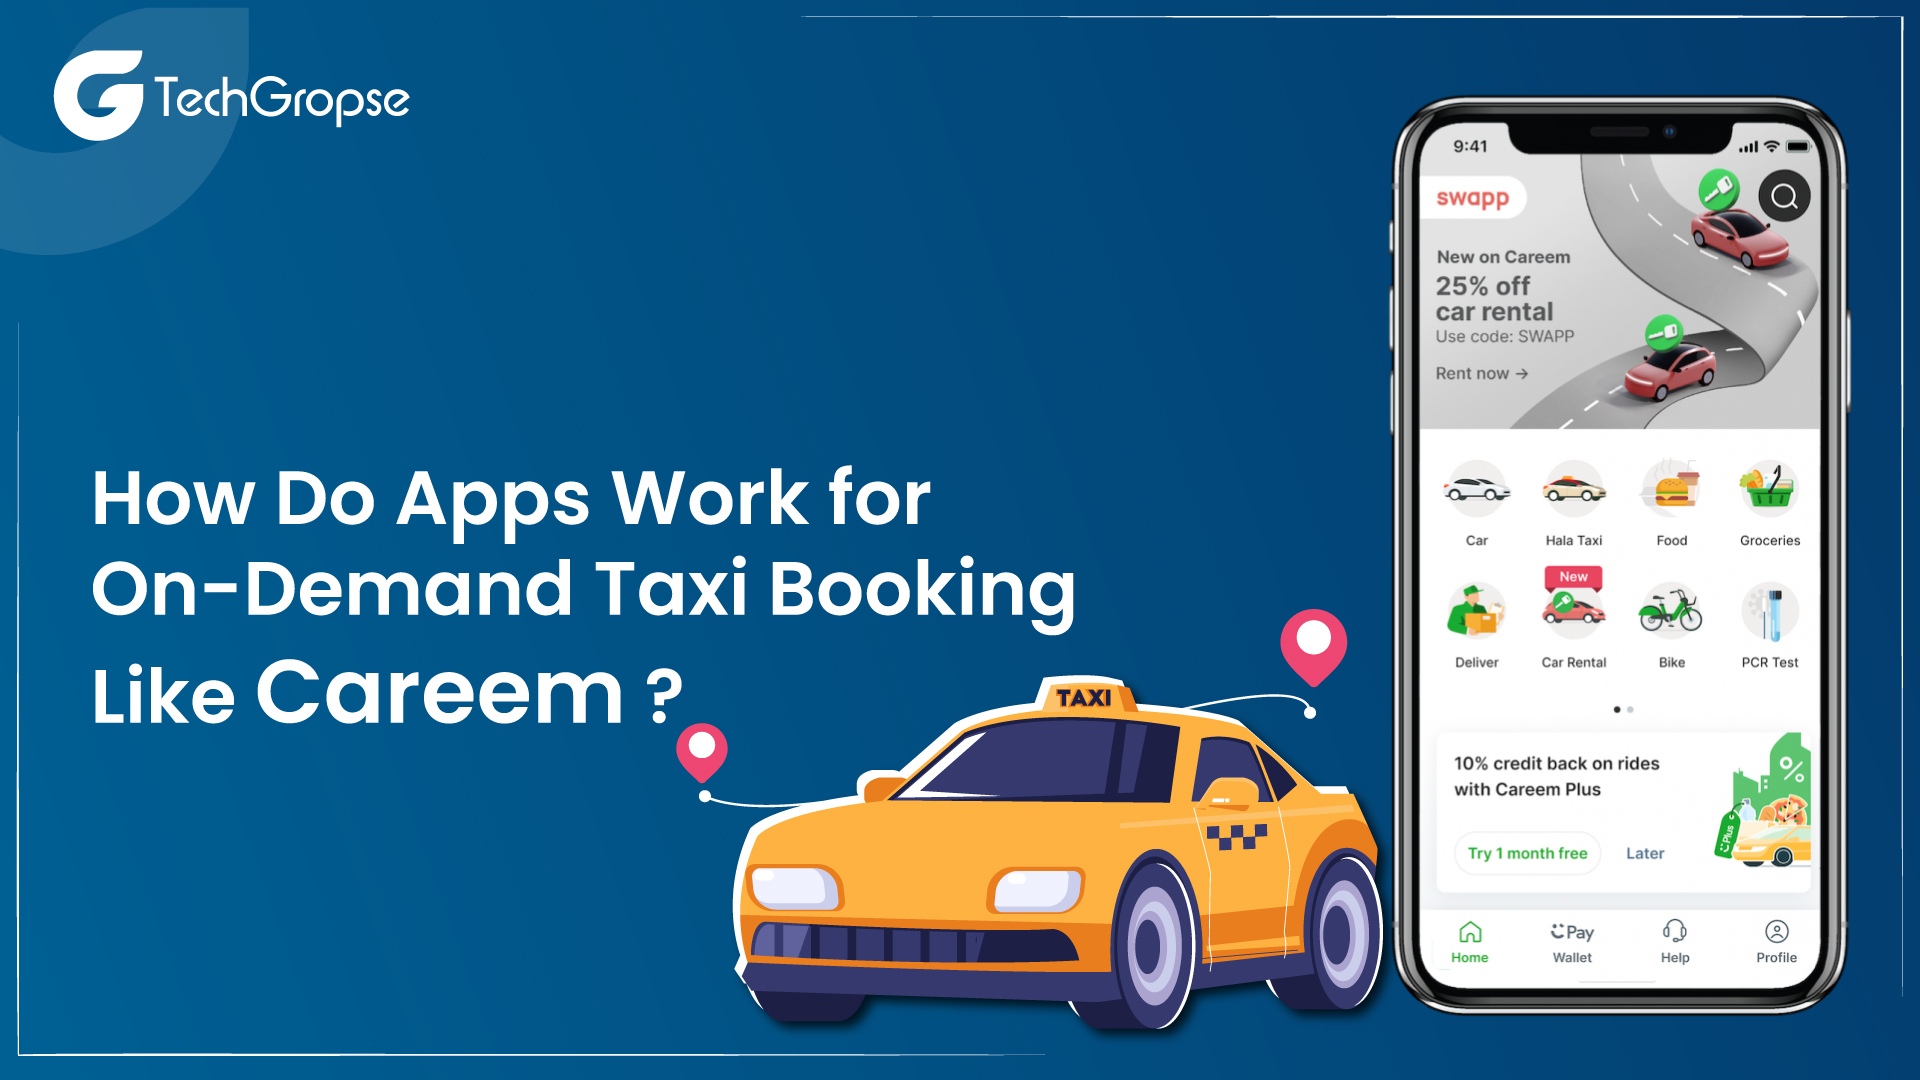 How Do Apps Work for On-Demand Taxi Booking Like Careem?